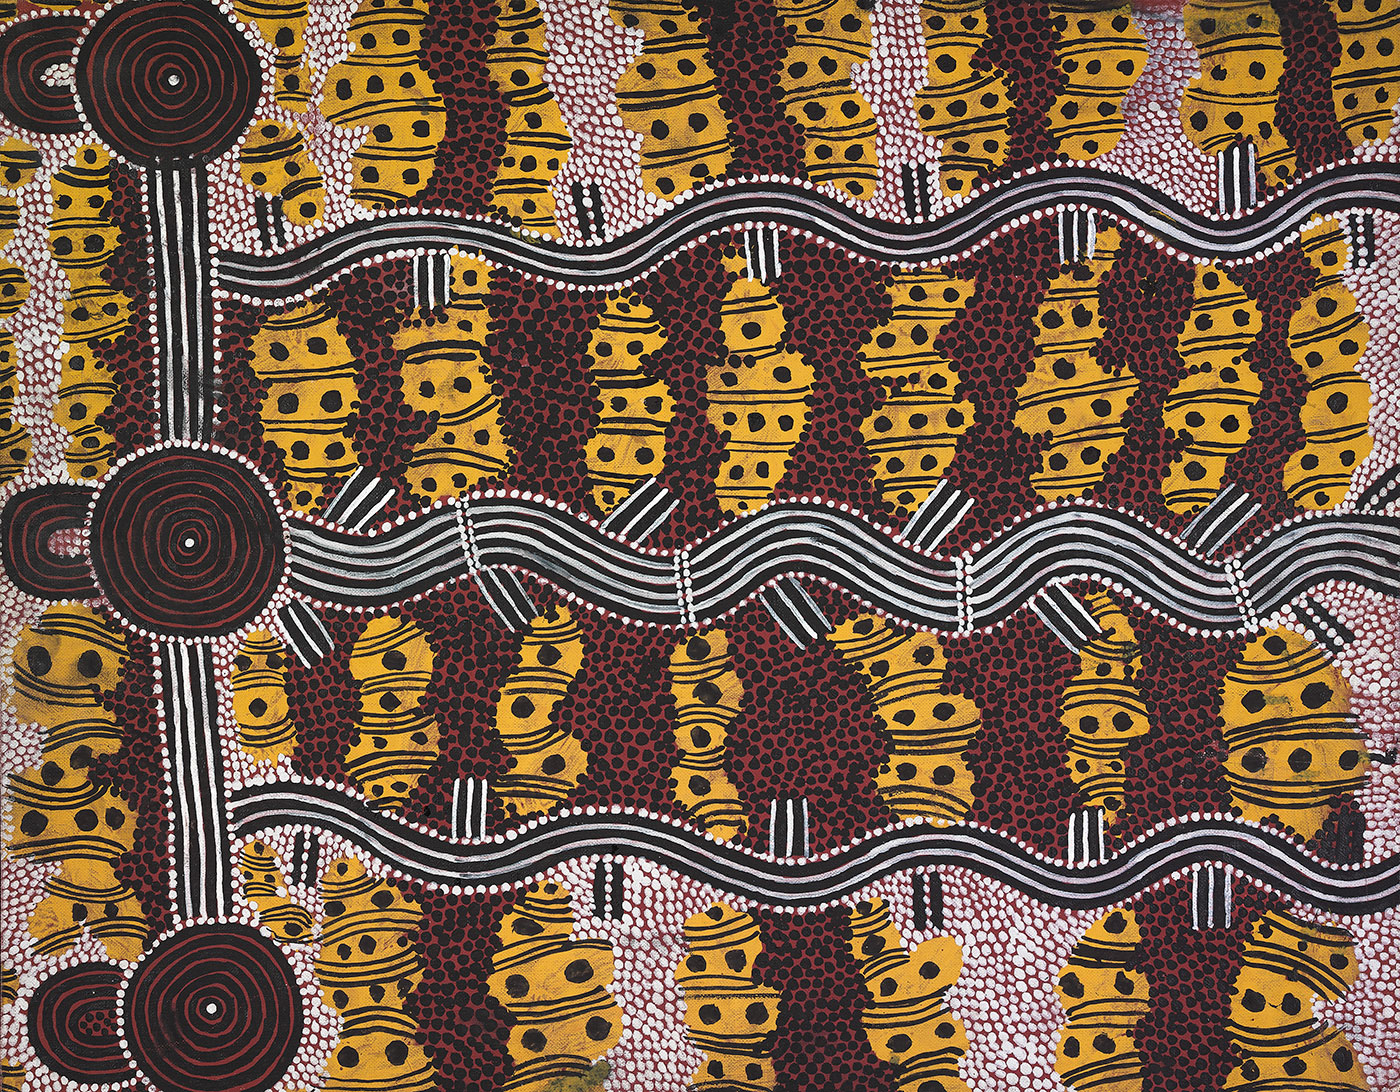 Storm Camps on the Rain Dreaming Trail 1978 by Kaapa Tjampitjinpa. - click to view larger image